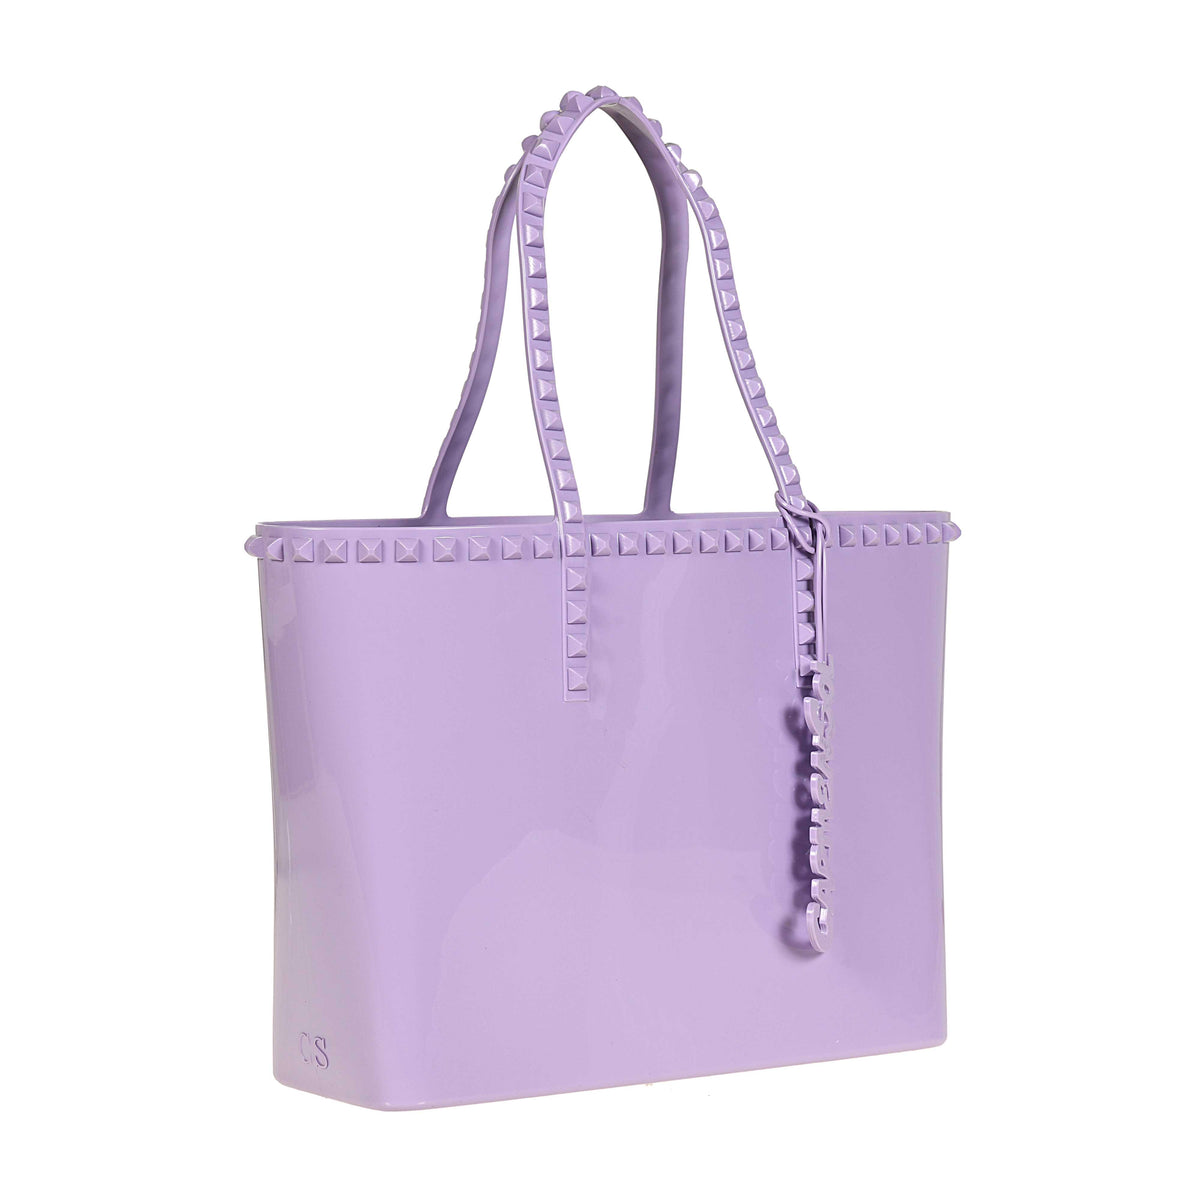 Seba studded beach purse in color violet from Carmen Sol